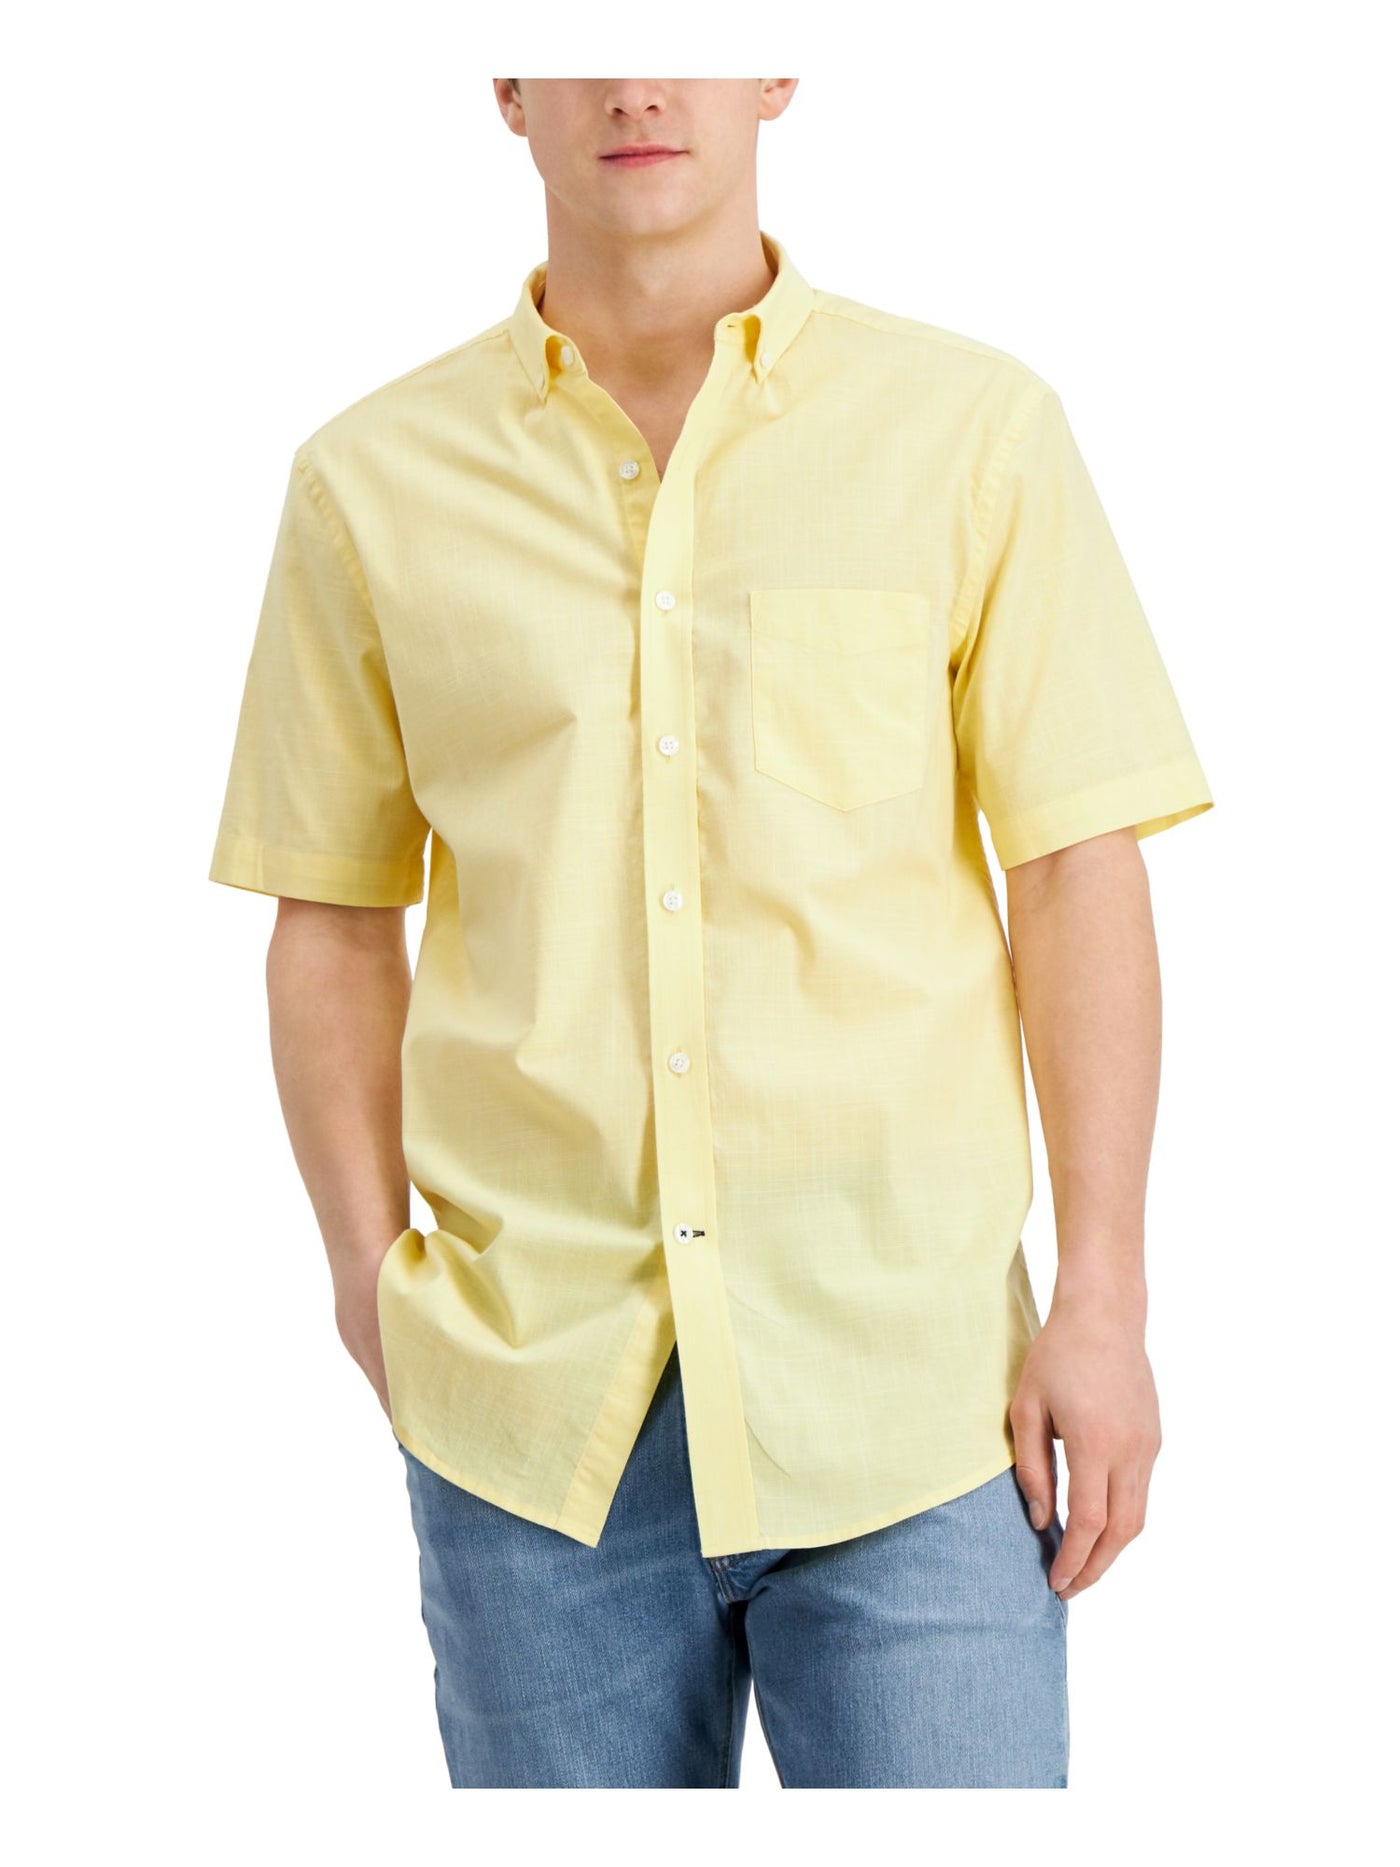 CLUBROOM Mens Yellow Classic Fit Button Down Stretch Casual Shirt XL